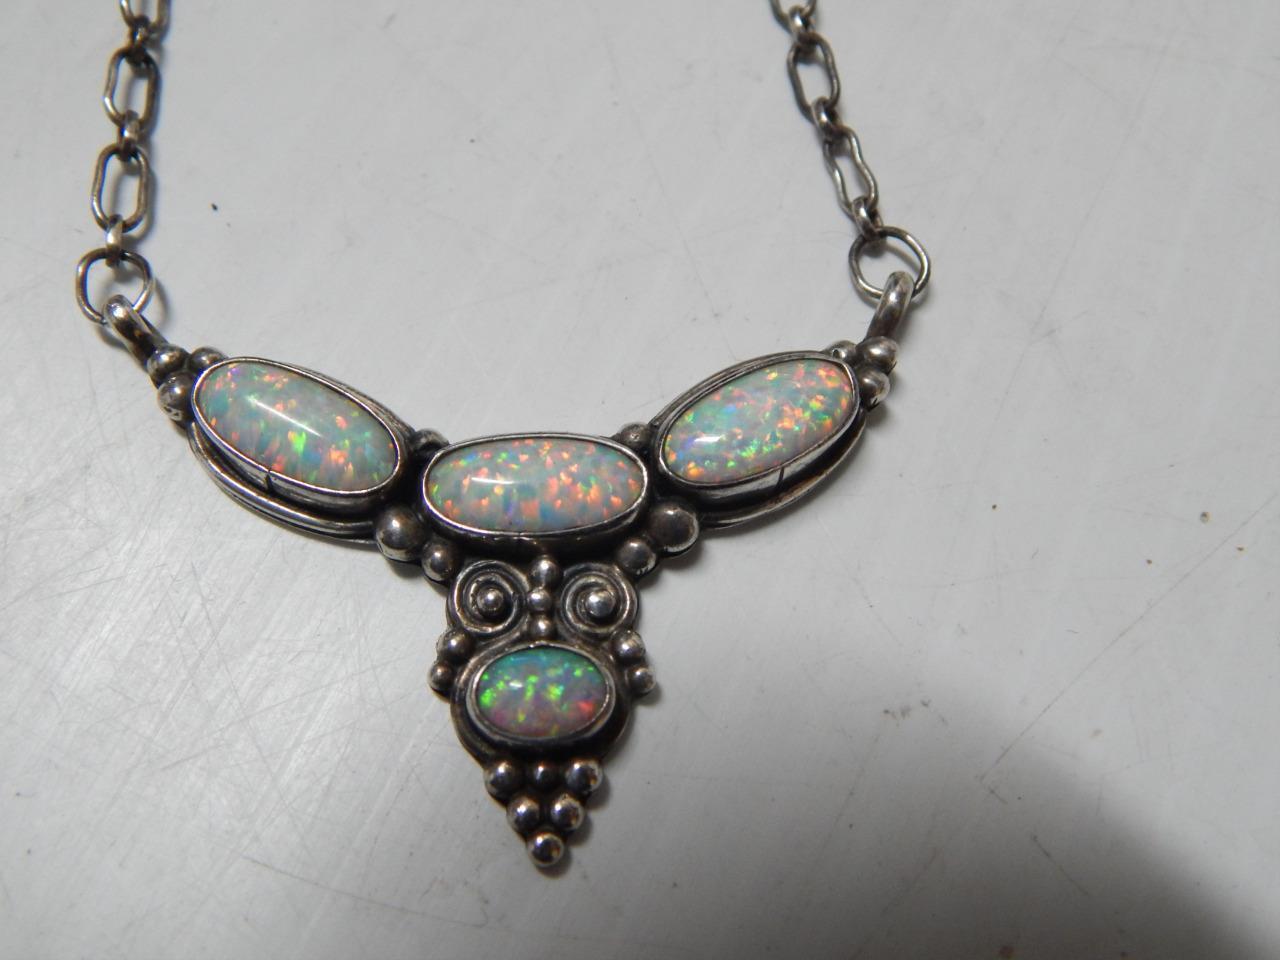 VINTAGE NAVAJO INDIAN STERLING SILVER + OPAL NECKLACE -HAND MADE CHAIN - NICE 